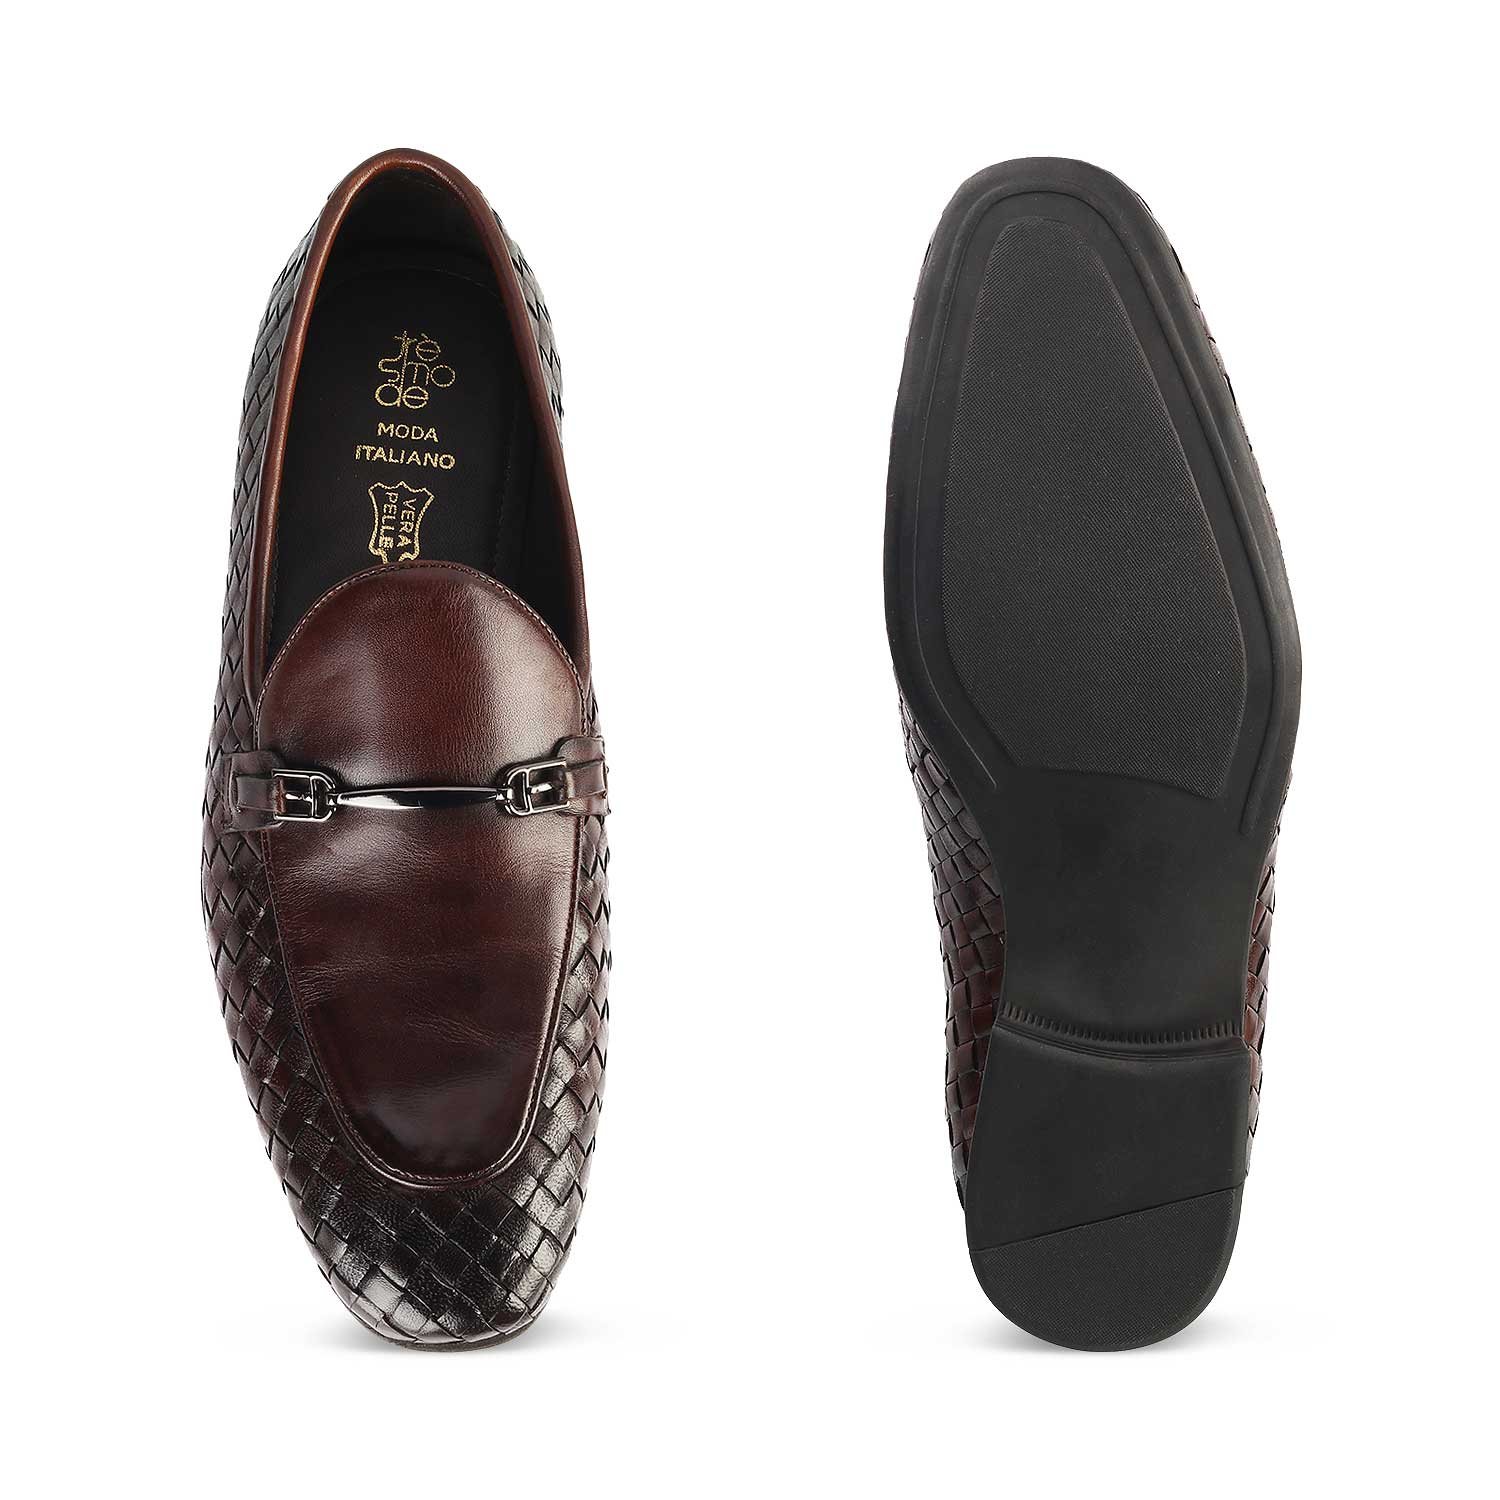 Someee Brown Men's Leather Loafers Online at Tresmode.com